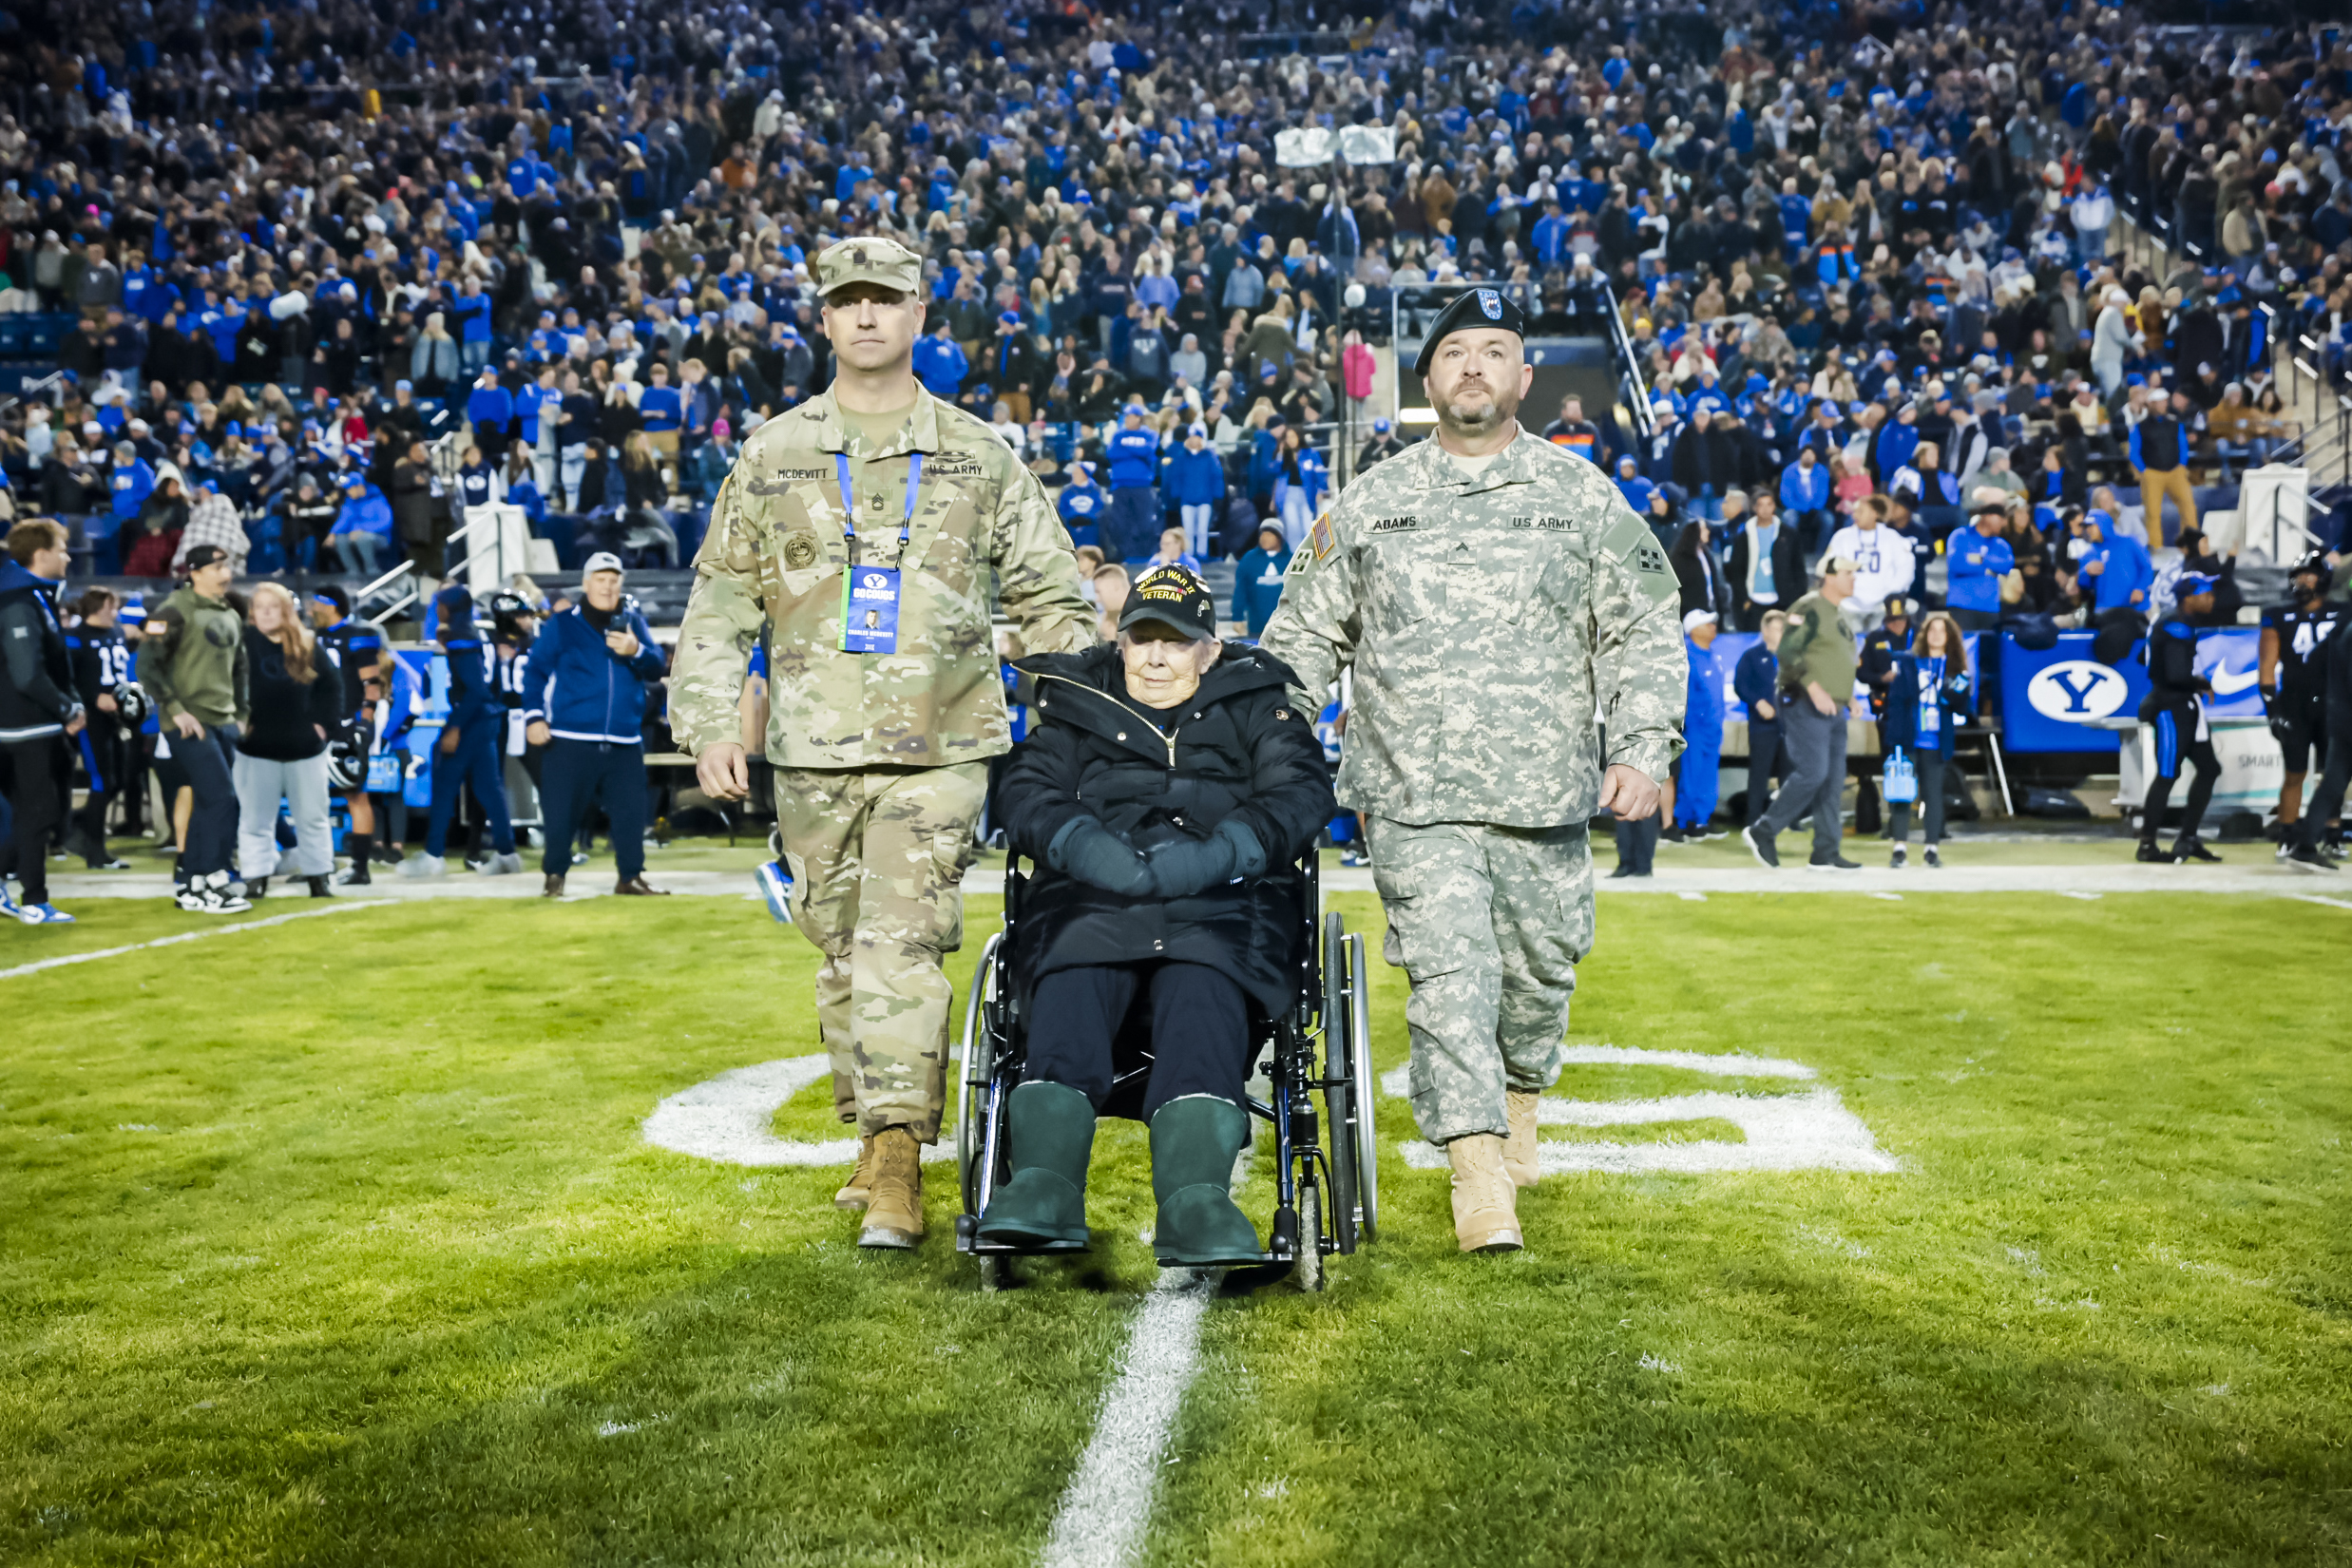 A 102-year-old World War II veteran, who happens to be one of BYU's biggest fans, was given the opp...